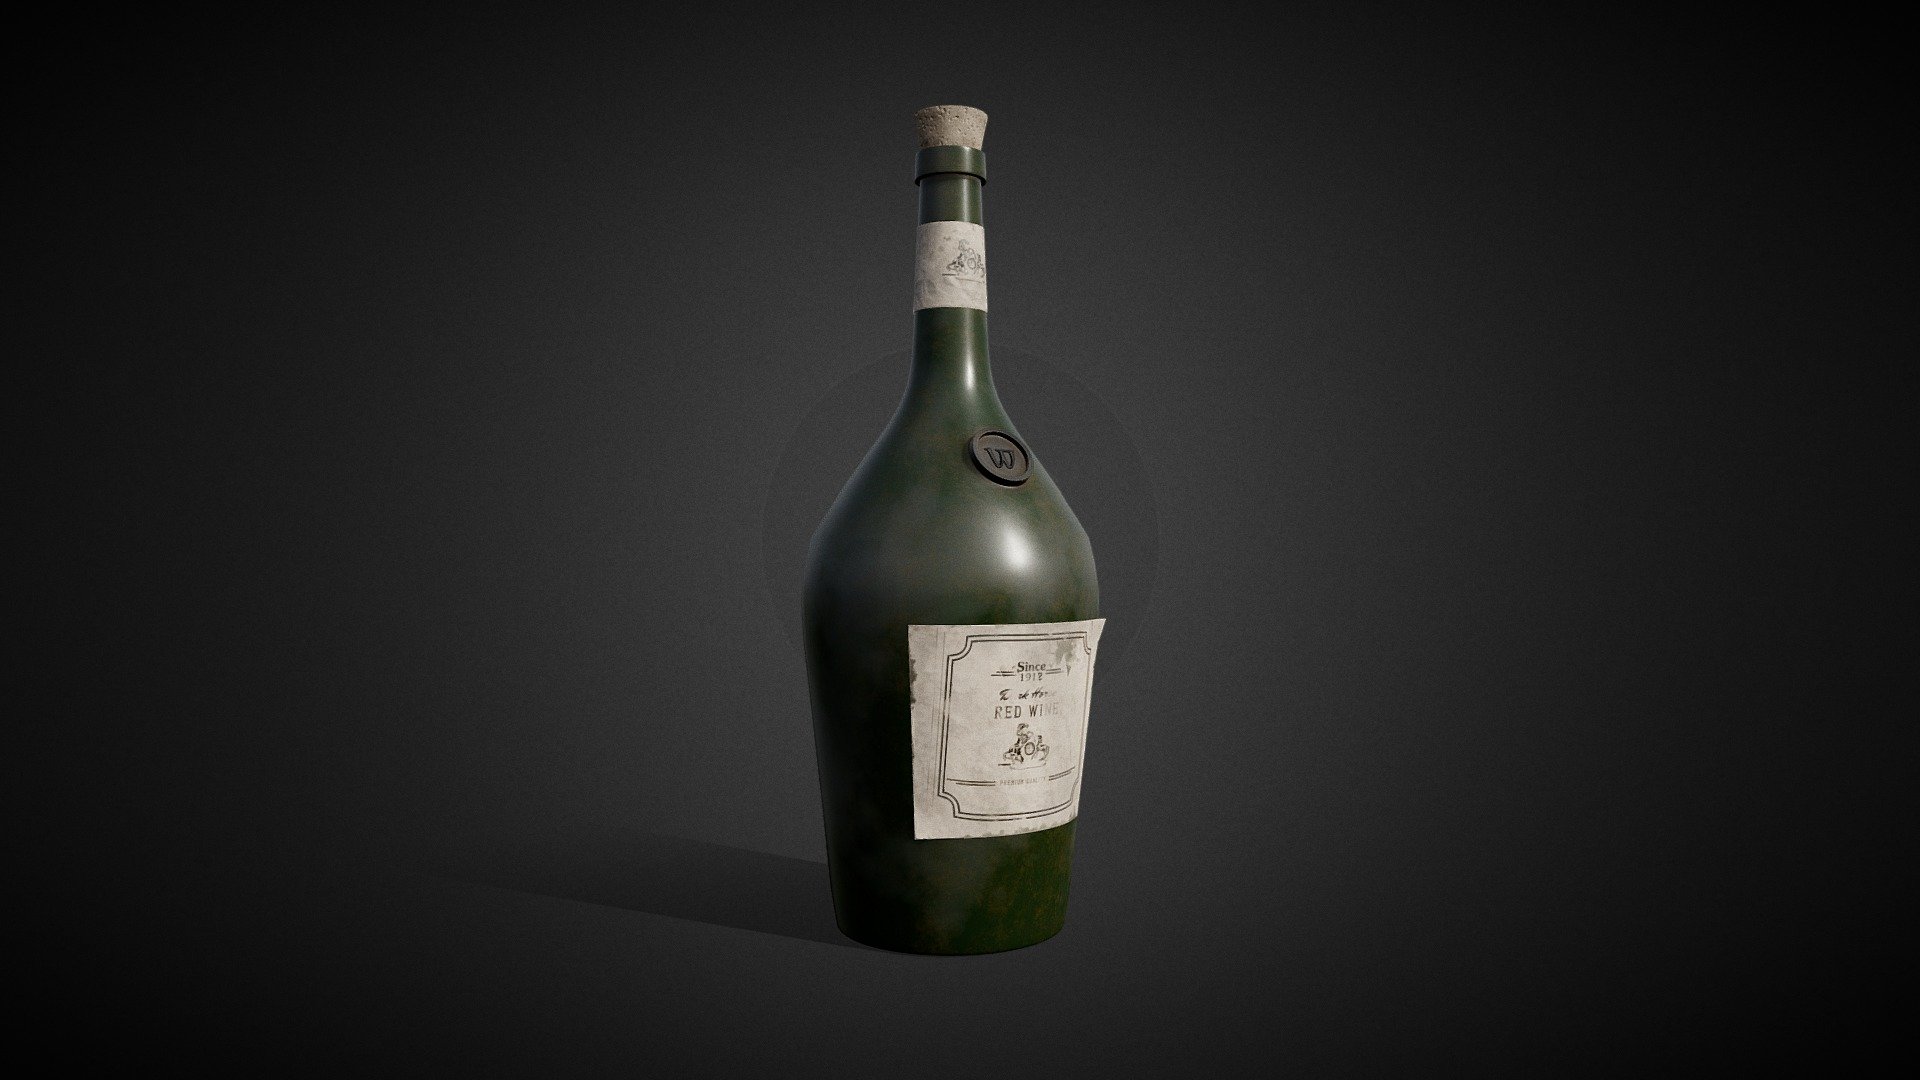 Tutorial here: https://www.youtube.com/channel/UC3R6lDf-Rlb9QW-D3CnhR7w

The model works perfectly in close-ups and high quality renders. It was originally modelled in 3ds Max 16, textured in Substance Painter and rendered with Marmoset Toolbag 3.

What is in the archive: MAX_22; OBJ; FBX ; Textures (2k resolution)

Features: Model resolutions are optimized for polygon efficiency. Model is fully textured with all materials applied. All textures and materials are included and mapped in every format. Autodesk 3ds Max models grouped for easy selection &amp; objects are logically named for ease of scene management. No cleaning up necessary, just drop model into your scene and start rendering. No special plugin needed to open scene.

Textures formats: PNG (2K) - Old Bottle - Tutorial Included - Buy Royalty Free 3D model by ninashaw 3d model